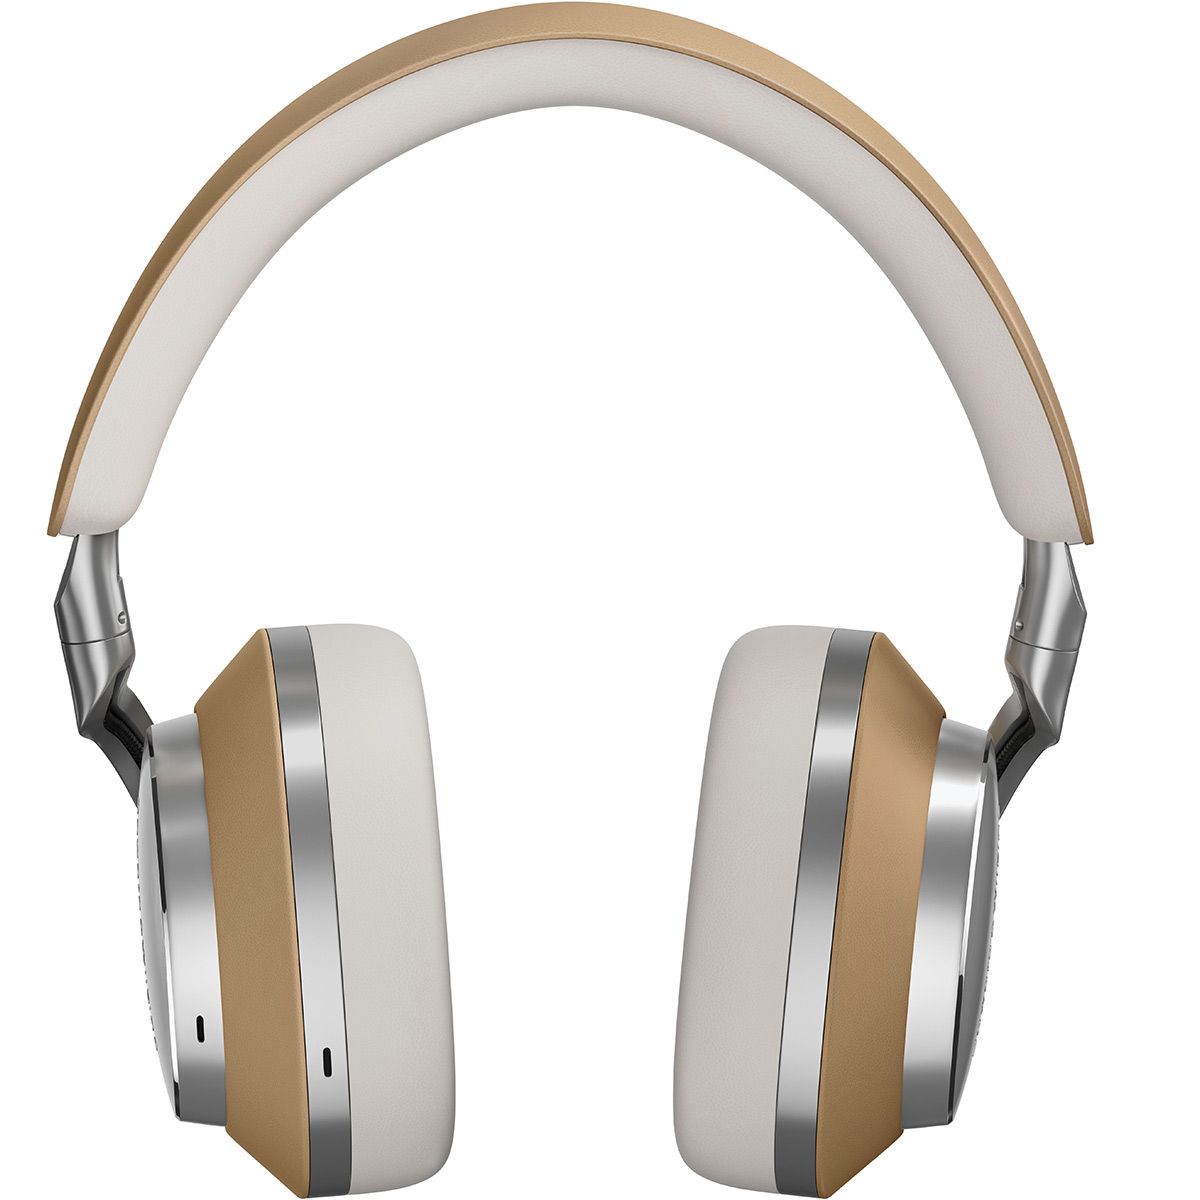 Close-up front view of the Px8 Premium Wireless Over-Ear Headphones in Tan.